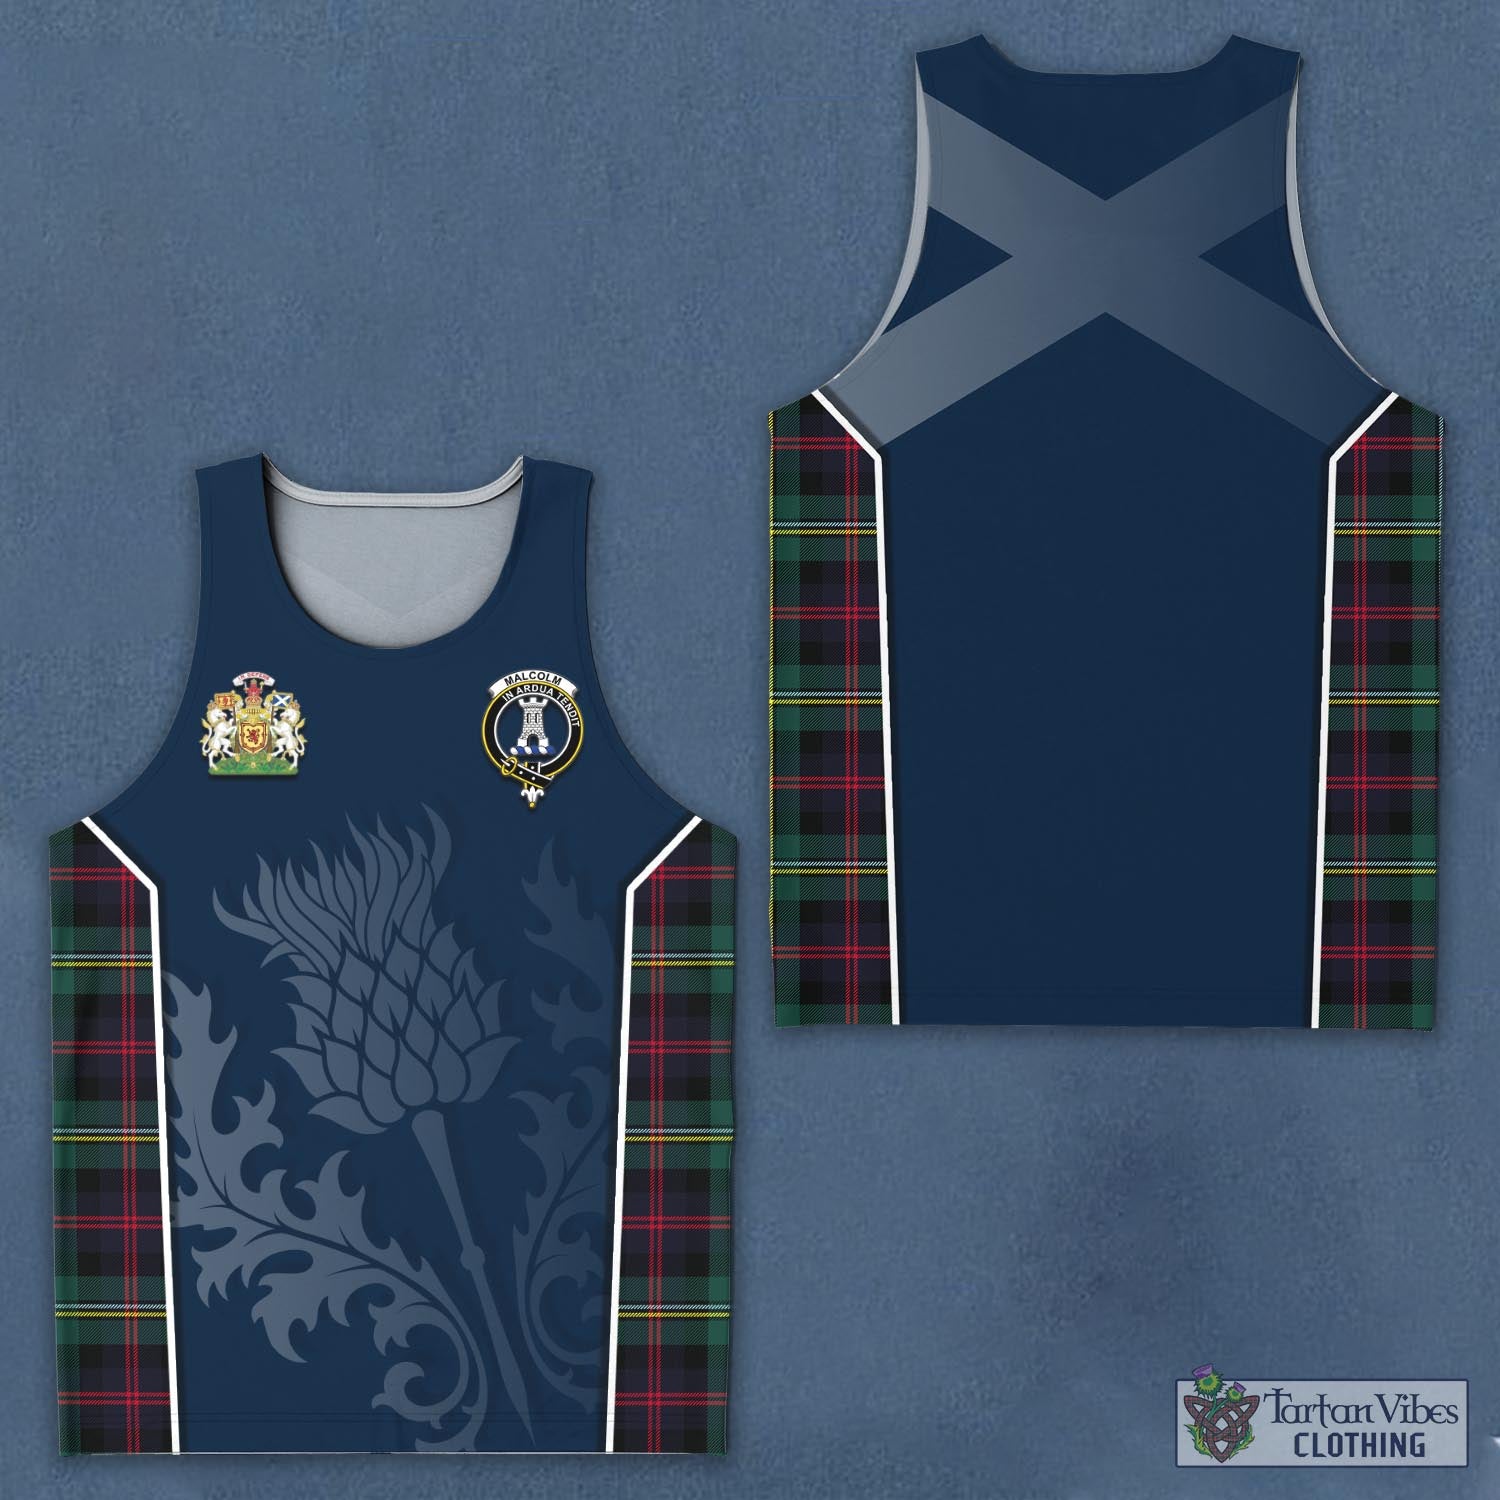 Tartan Vibes Clothing Malcolm Modern Tartan Men's Tanks Top with Family Crest and Scottish Thistle Vibes Sport Style